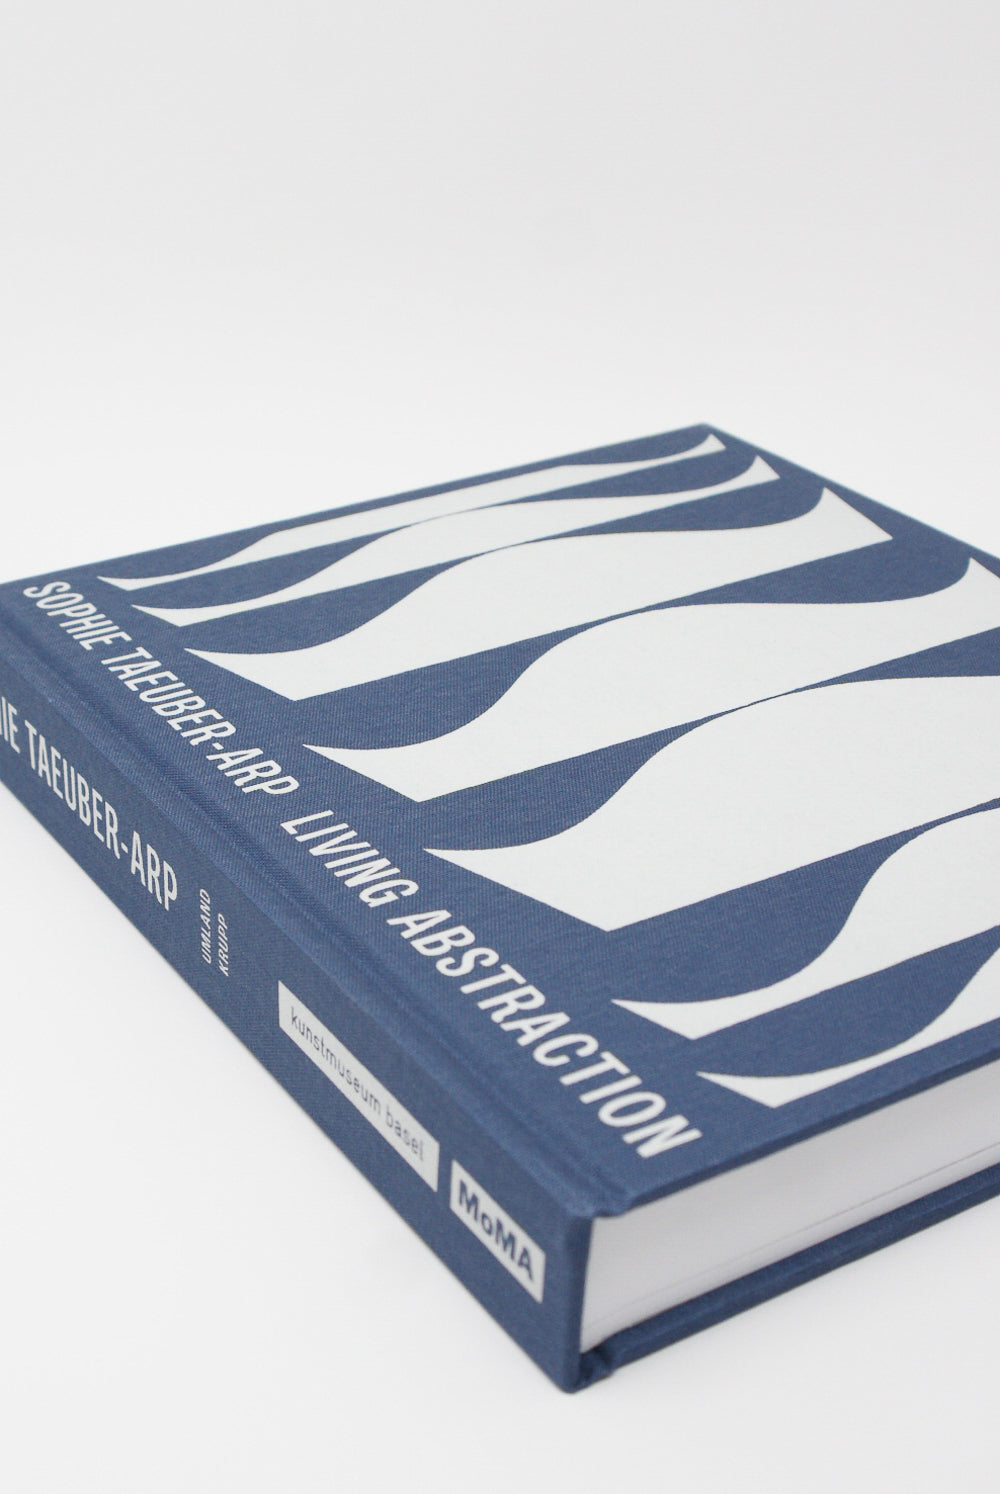 The cover of a Sophie Taeuber-Arp: Living Abstraction retrospective book with a blue and white design, published by Artbook/D.A.P.